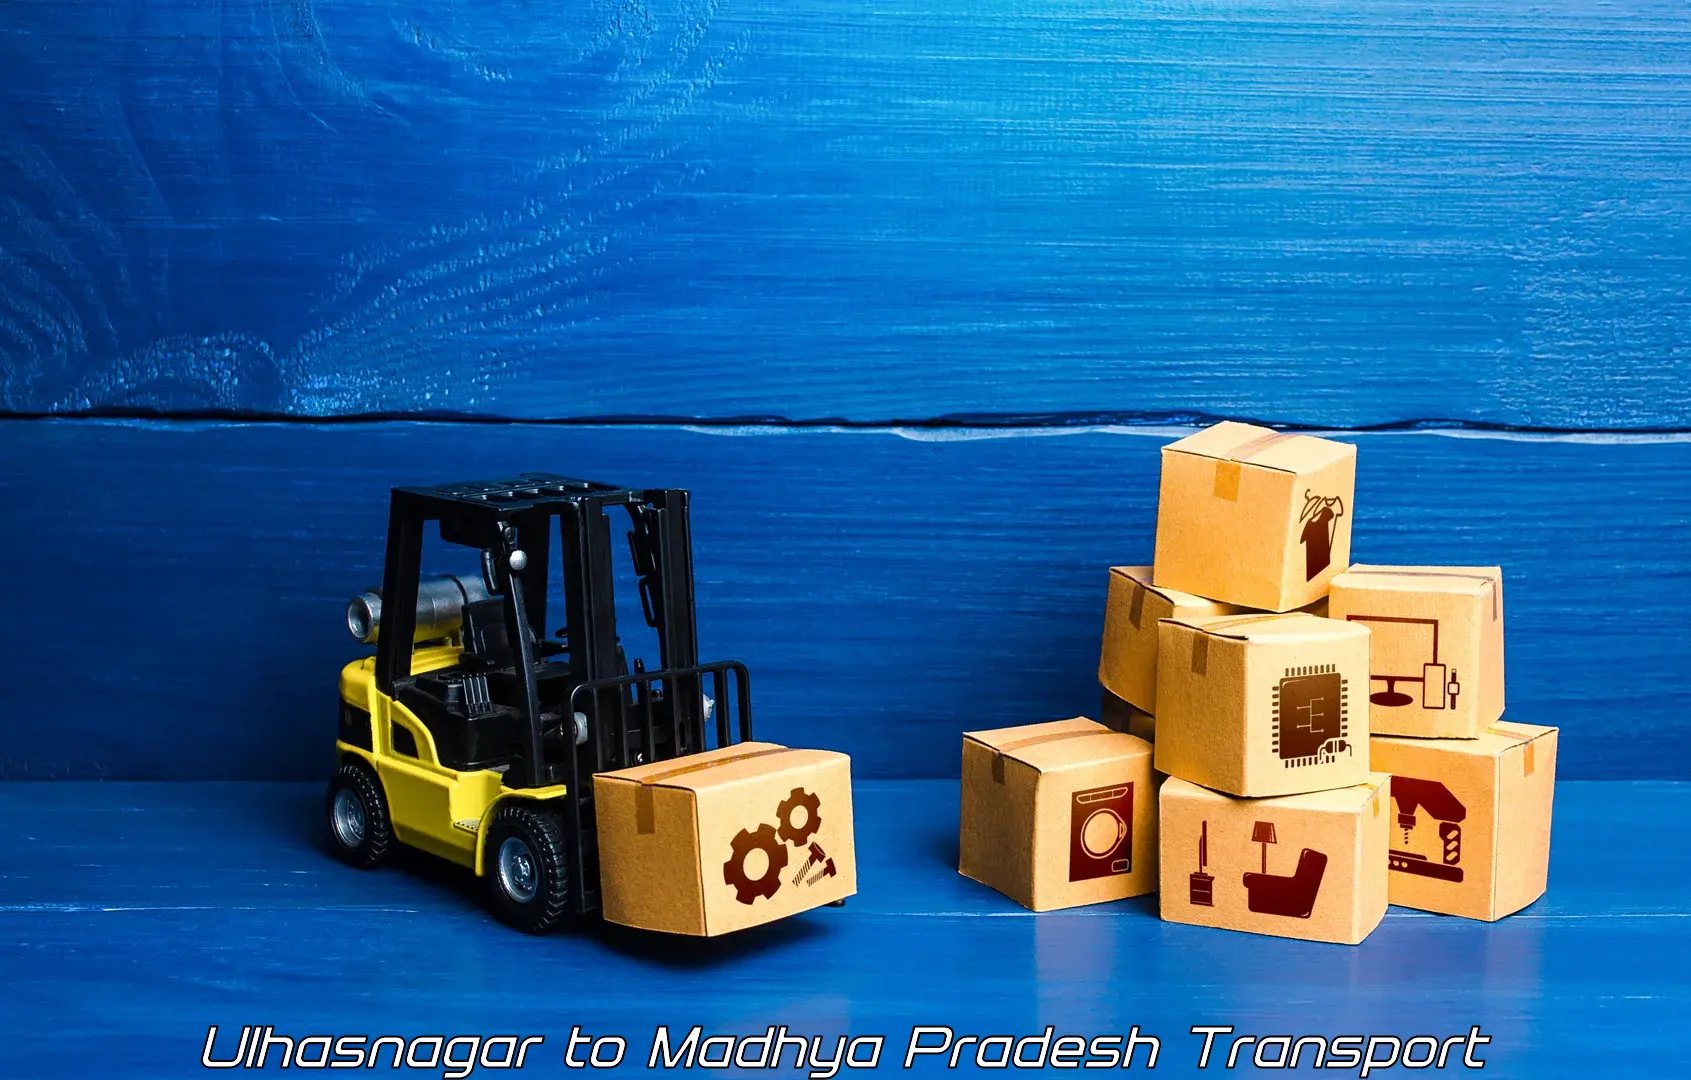 Truck transport companies in India Ulhasnagar to Neemuch